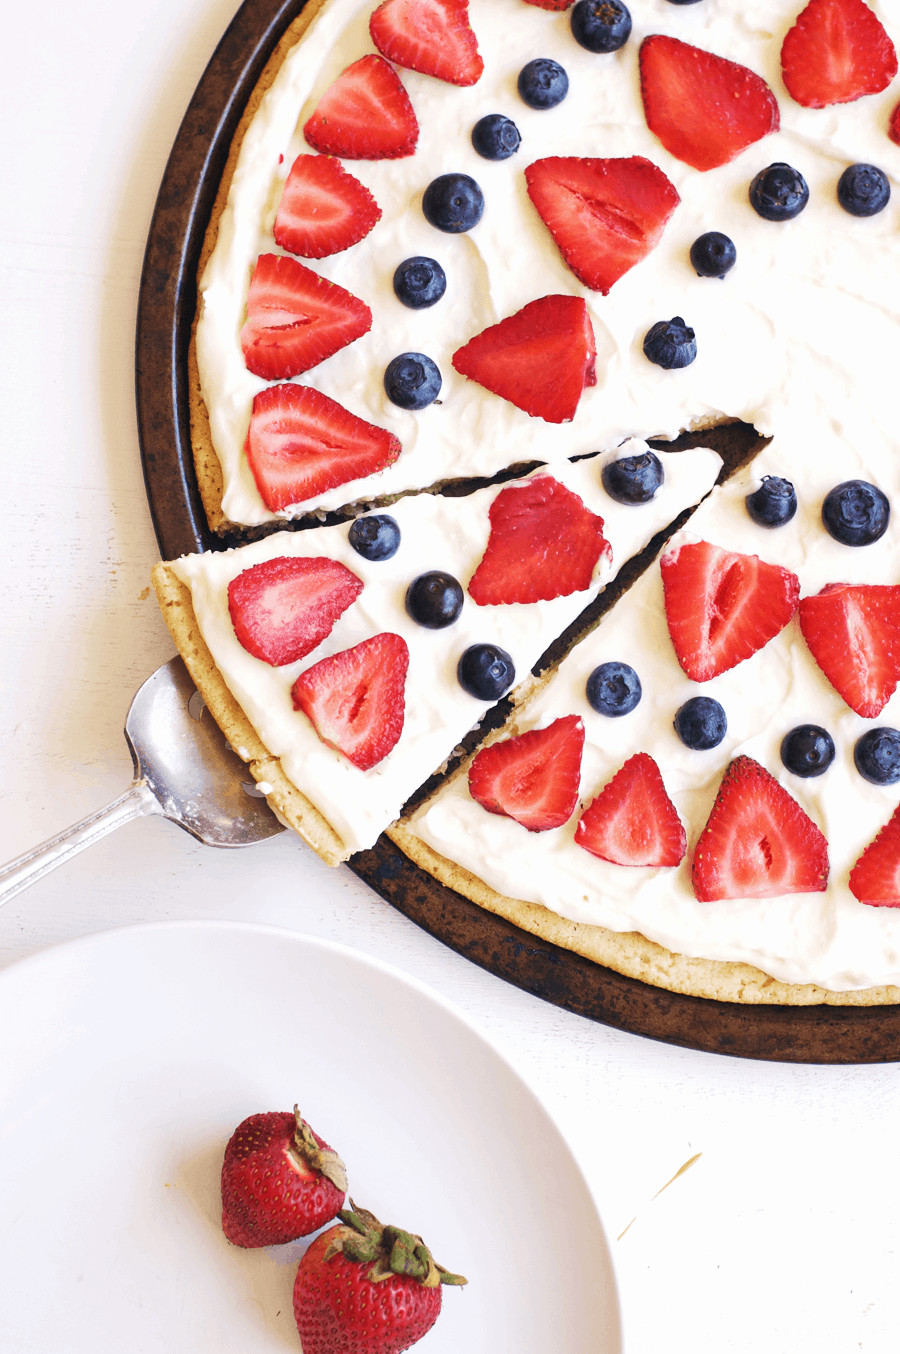 Forth Of July Desserts
 Fourth of July Berry Dessert Pizza